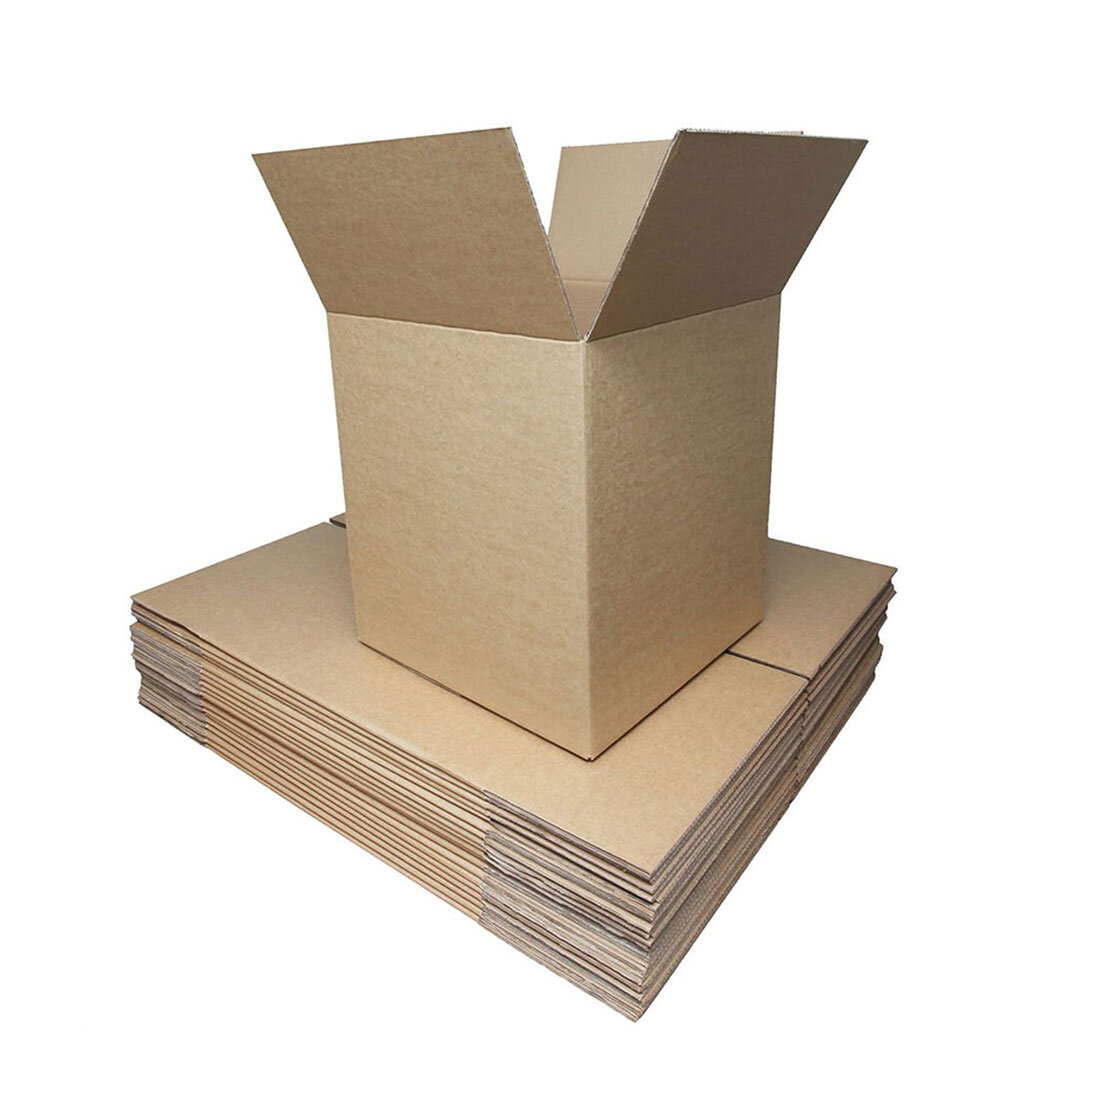 20 CARDBOARD MOVING BOXES DOUBLE WALL MAILING PACK POSTAL BOXES 18"x12"x12" 